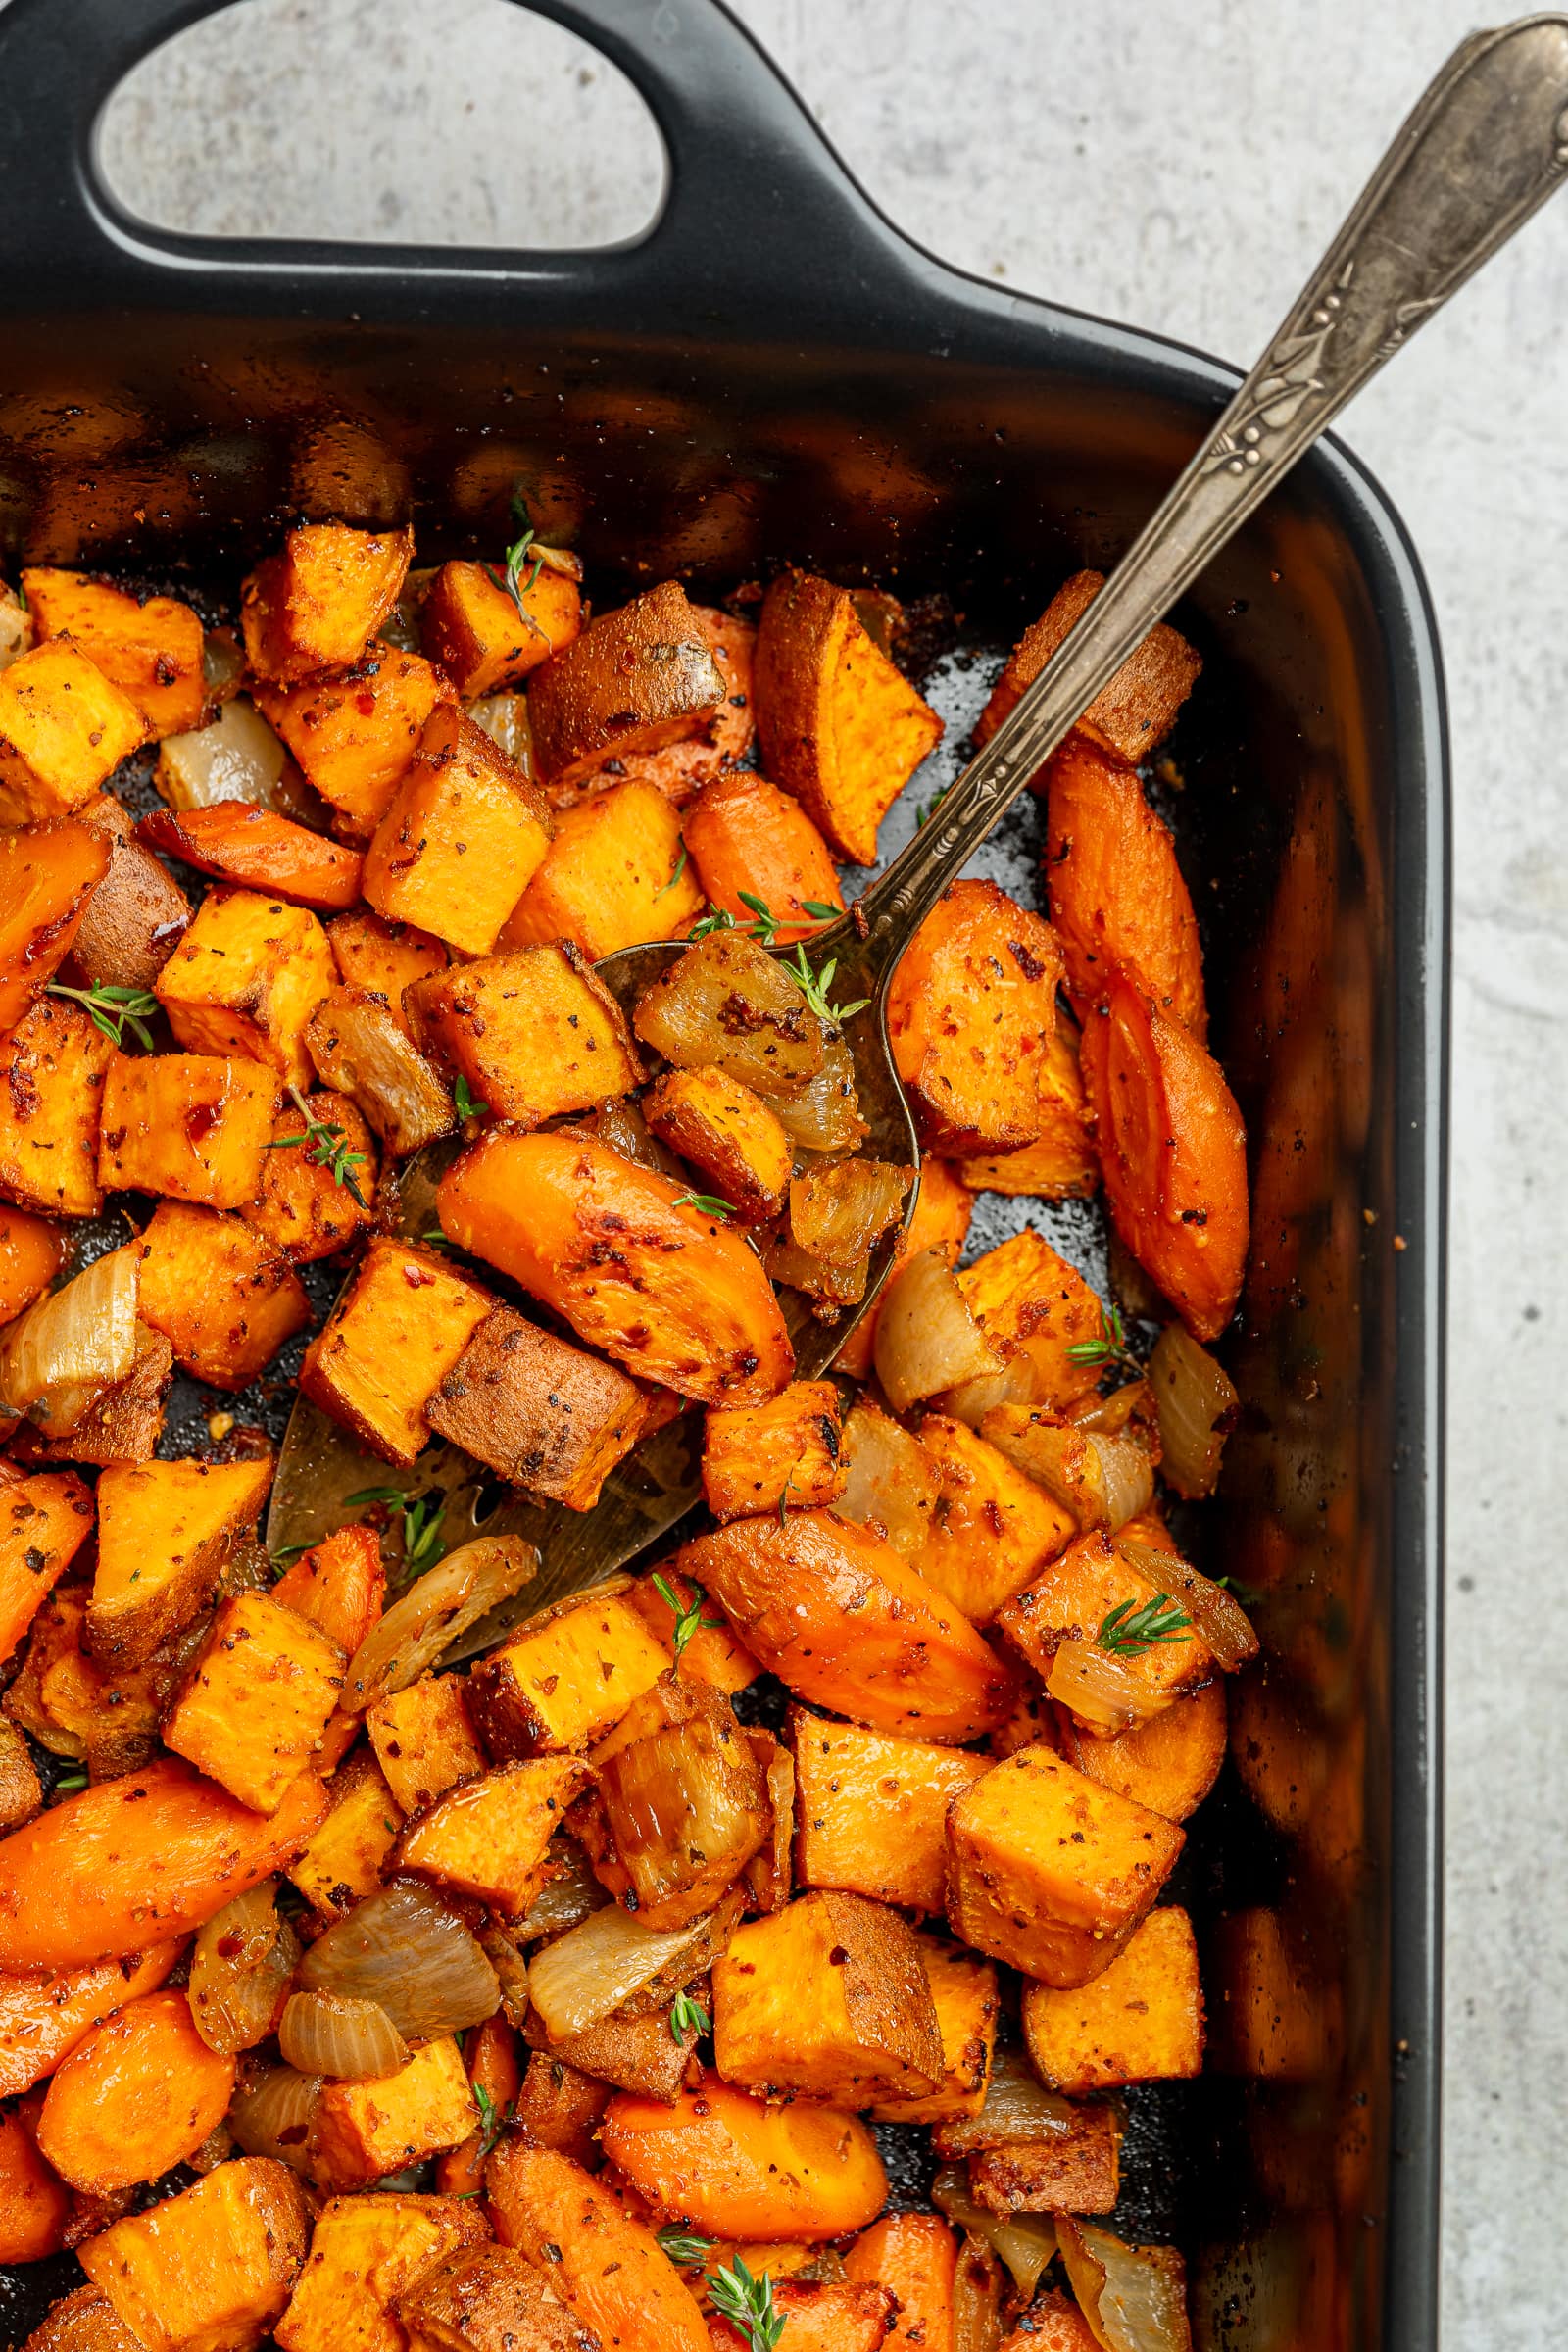 Roasted sweet potatoes and carrots garnished with fresh thyme.